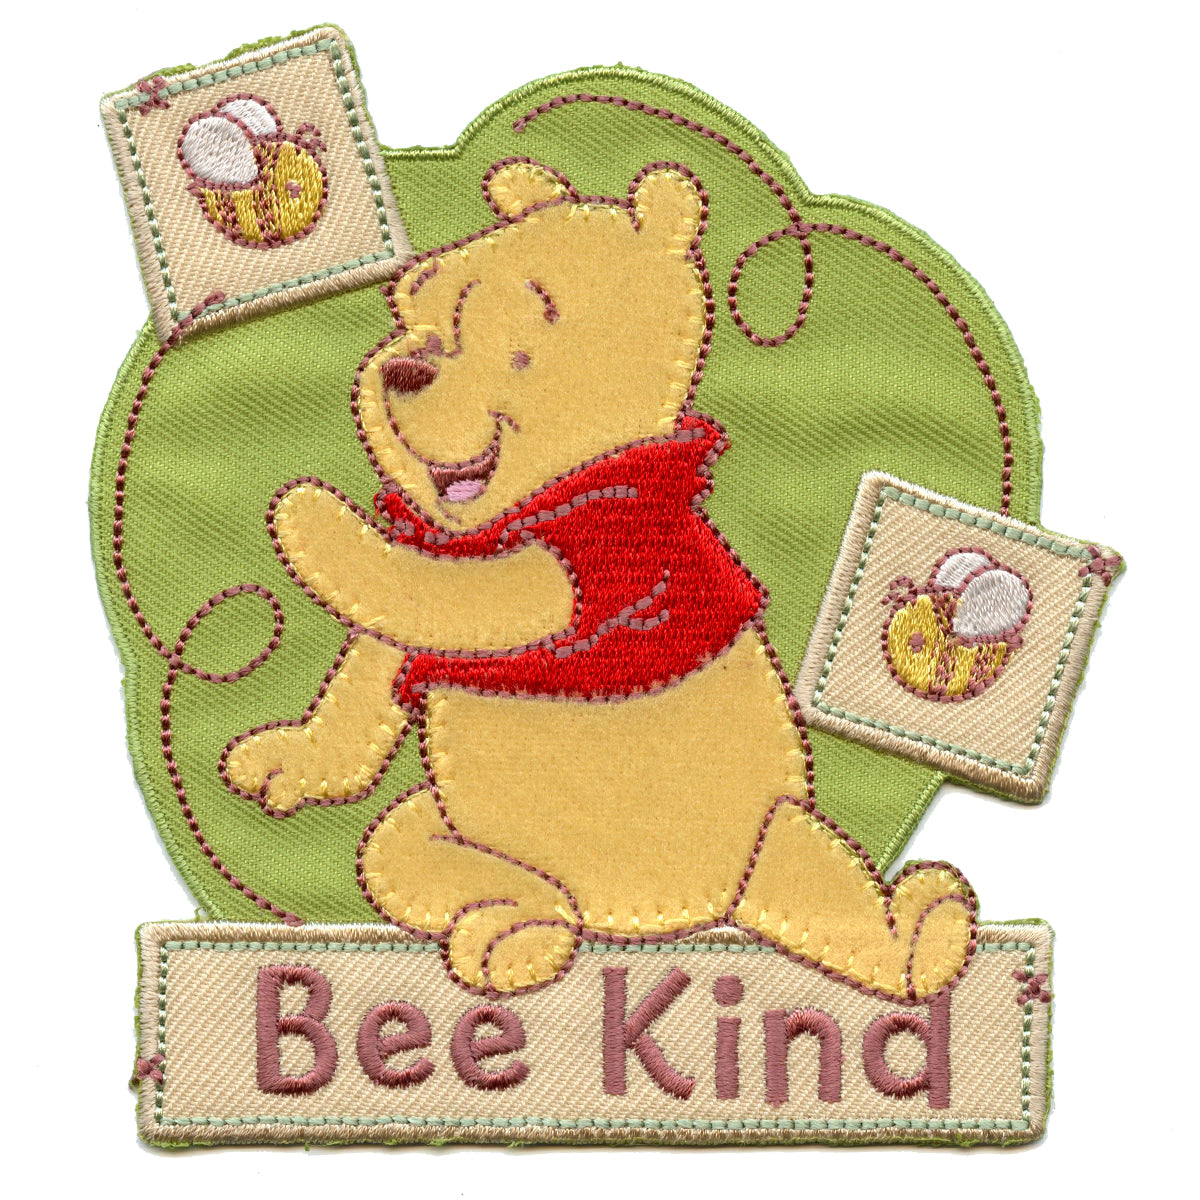 Disney Winnie The Pooh "Bee Kind" Embroidered Applique Iron On Patch 